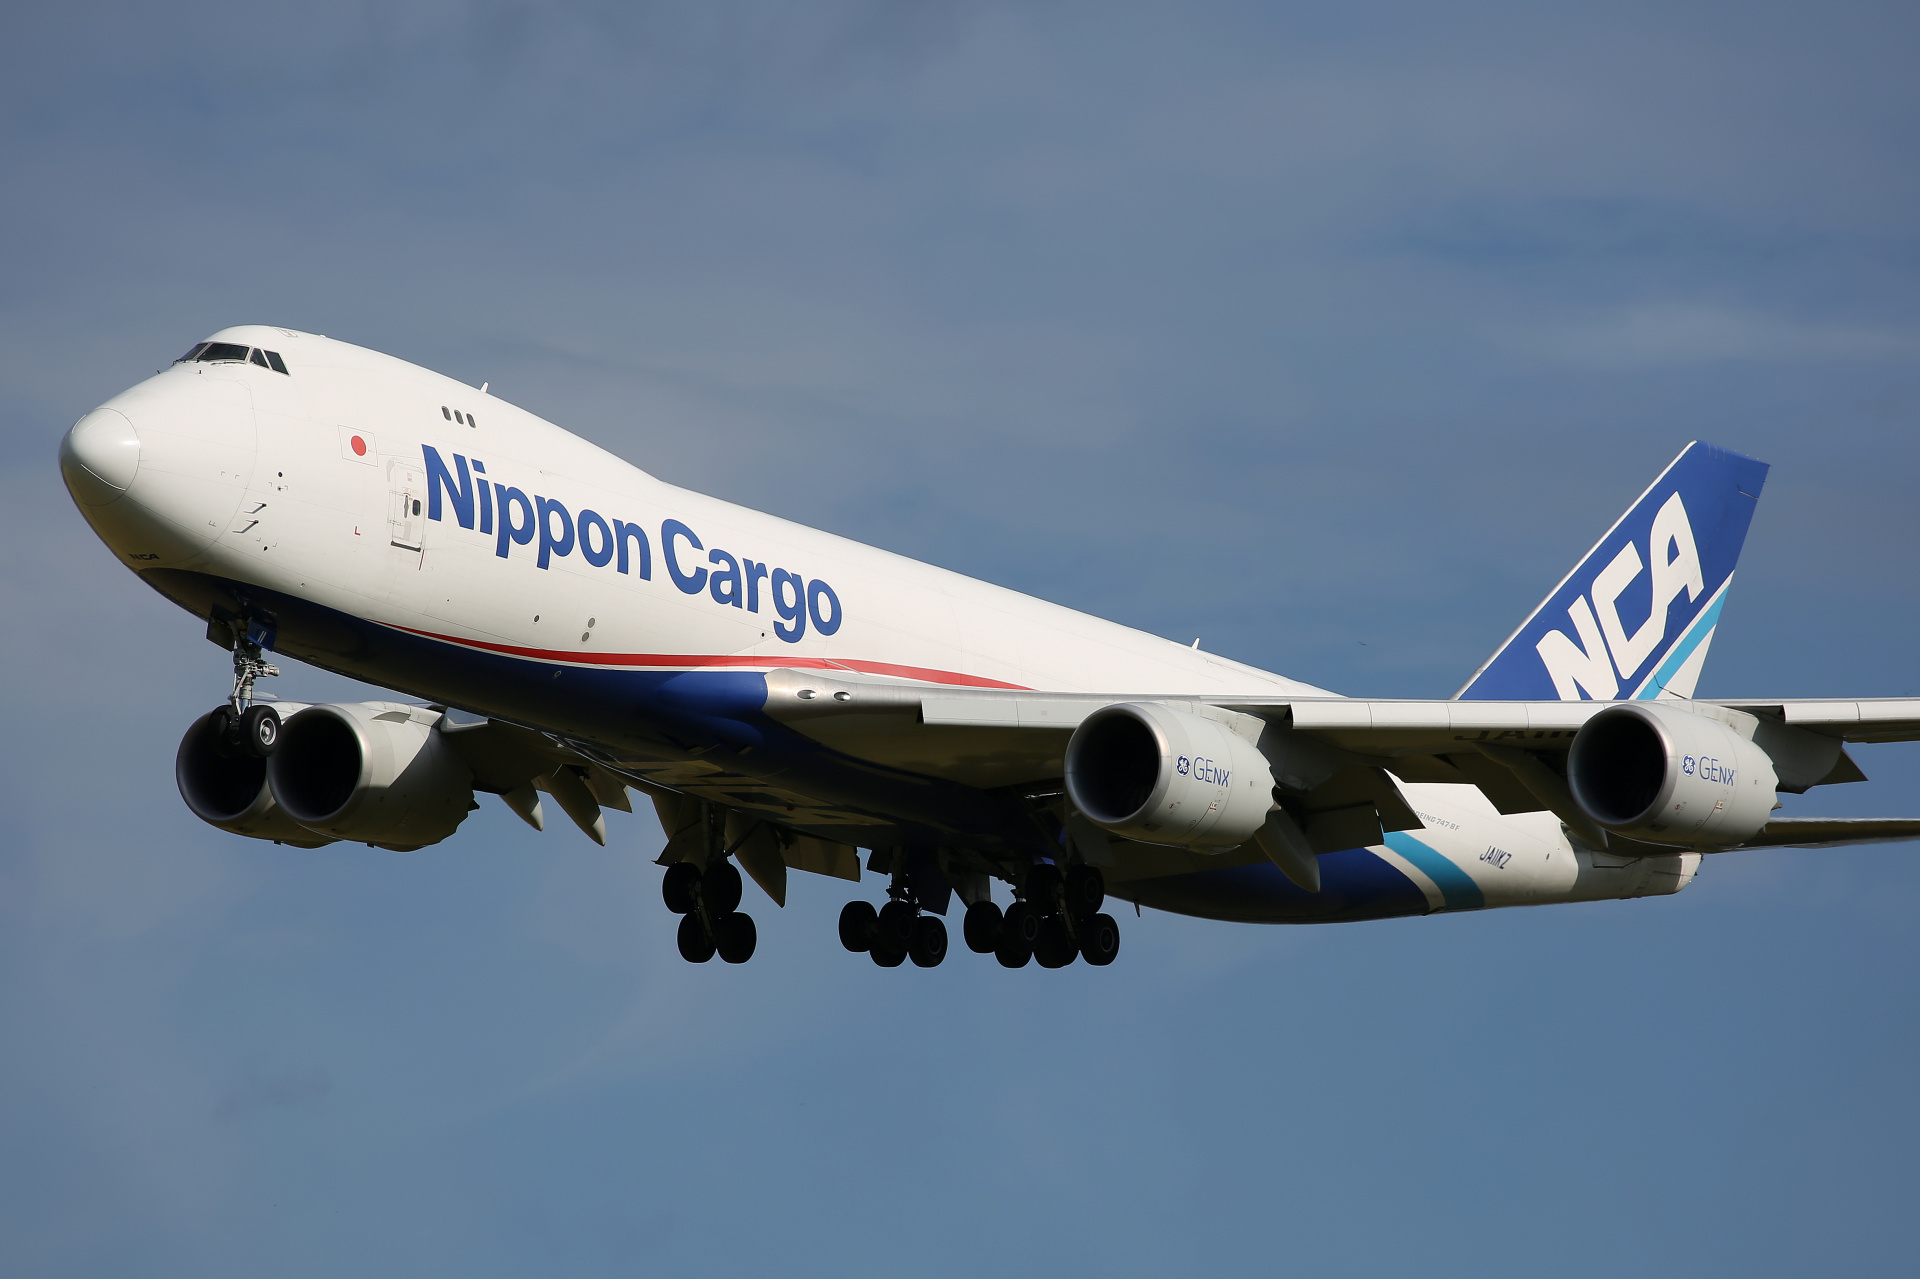 JA11KZ, Nippon Cargo Airlines (Aircraft » Schiphol Spotting » Boeing 747-8F)